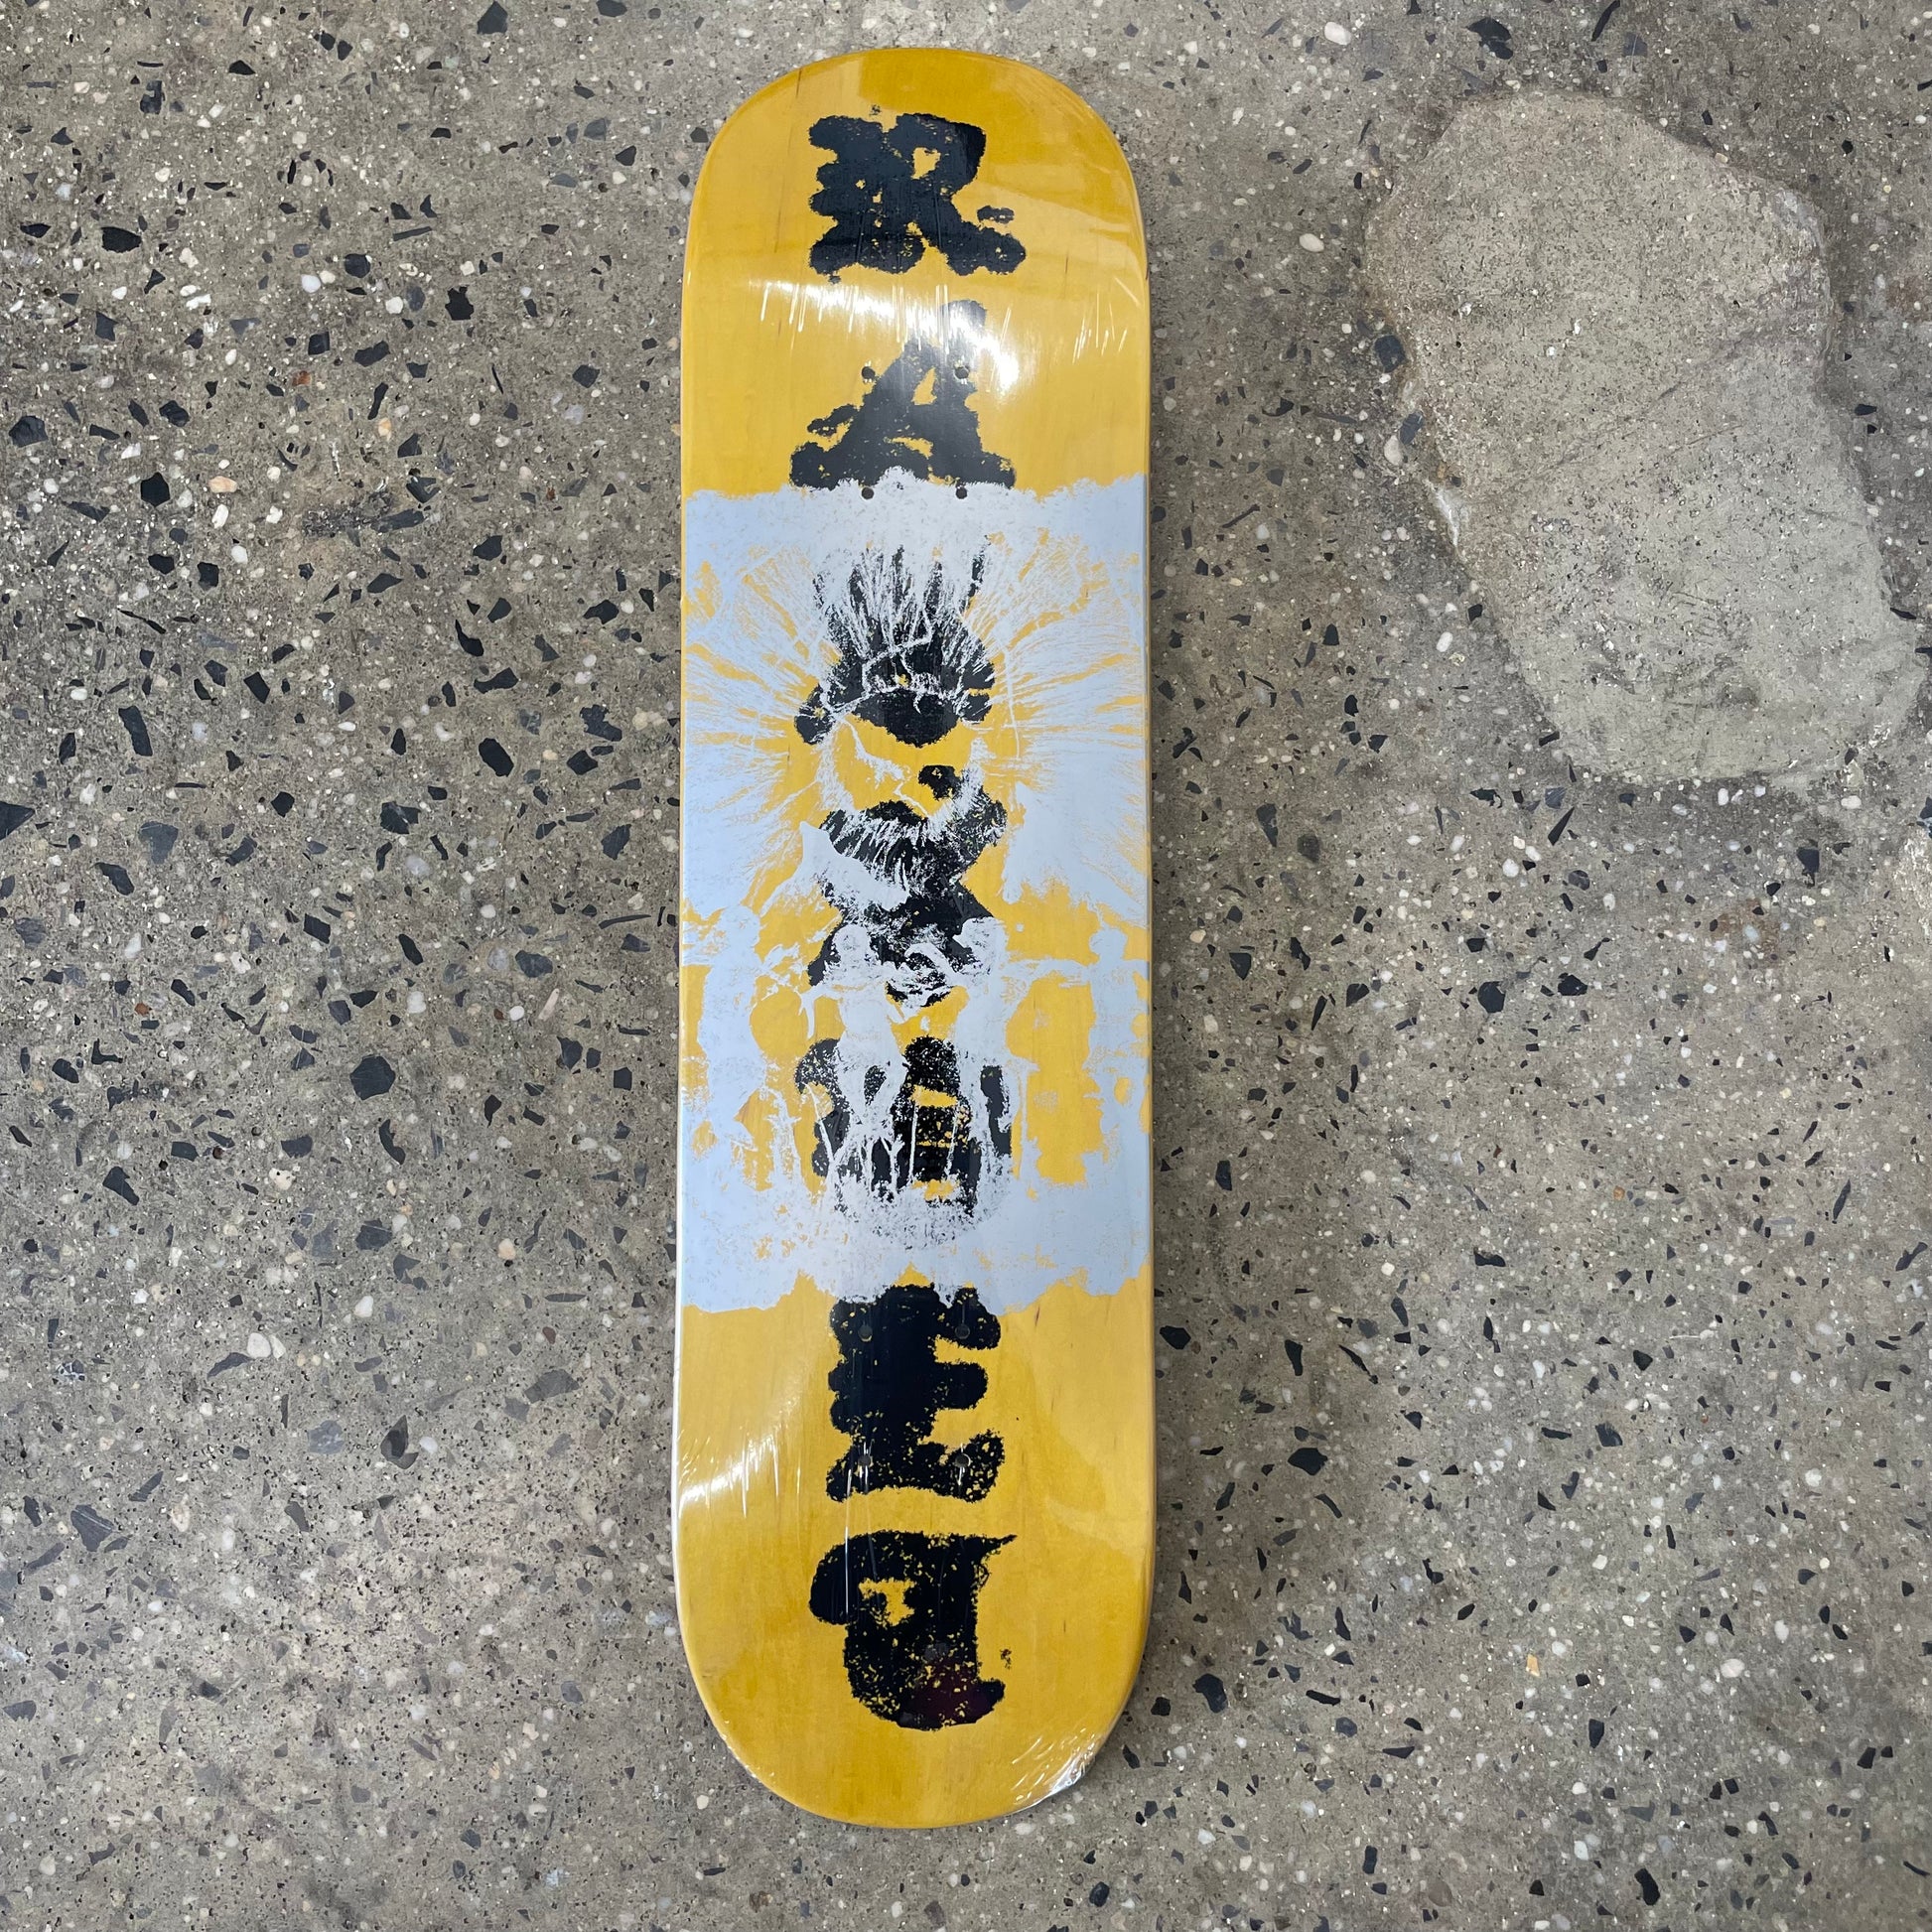 yellow, black, white abstract design on skate deck